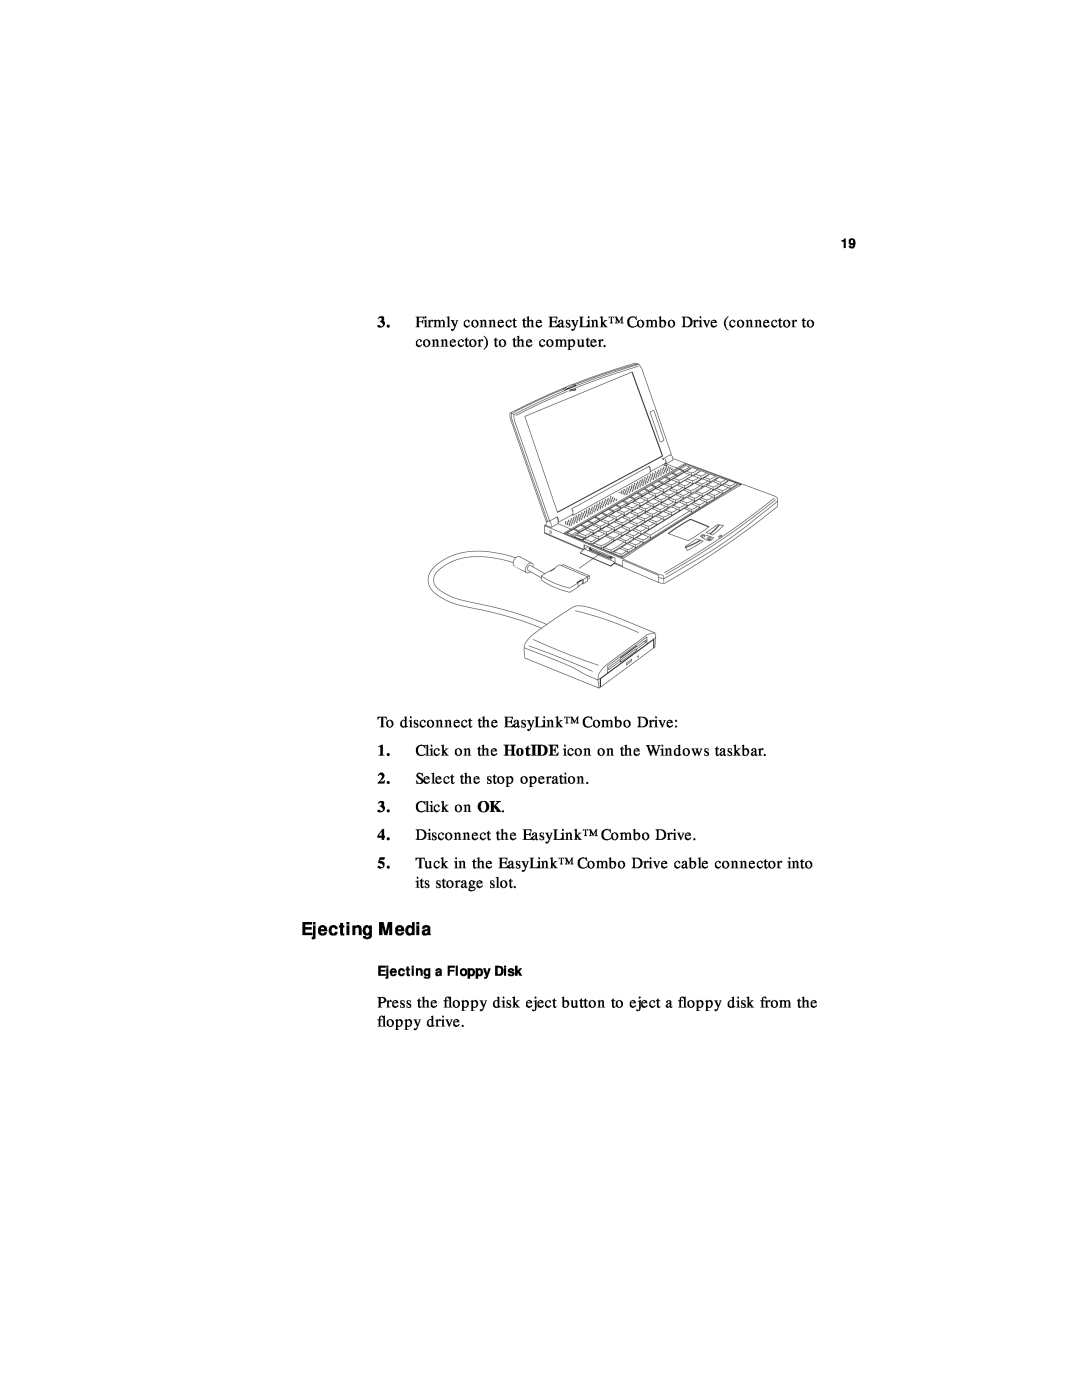 Acer 330 Series manual Ejecting Media, Ejecting a Floppy Disk 